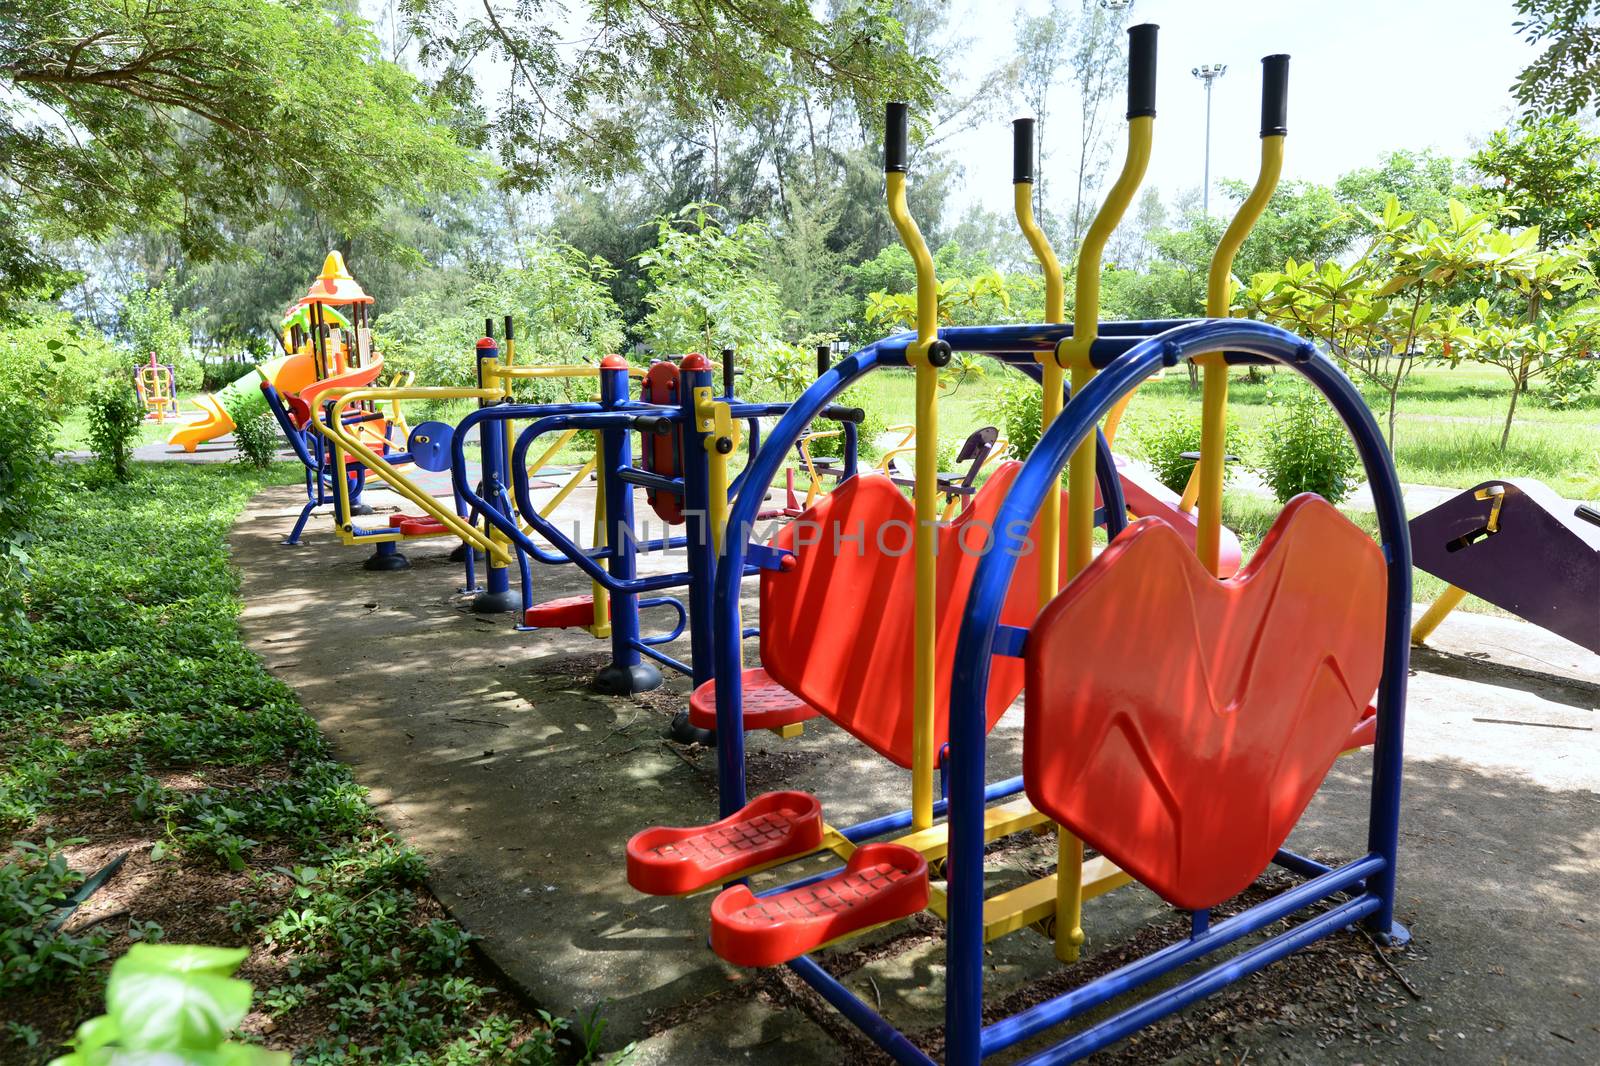 The colorful outdoor exercise machines in the park by hellogiant